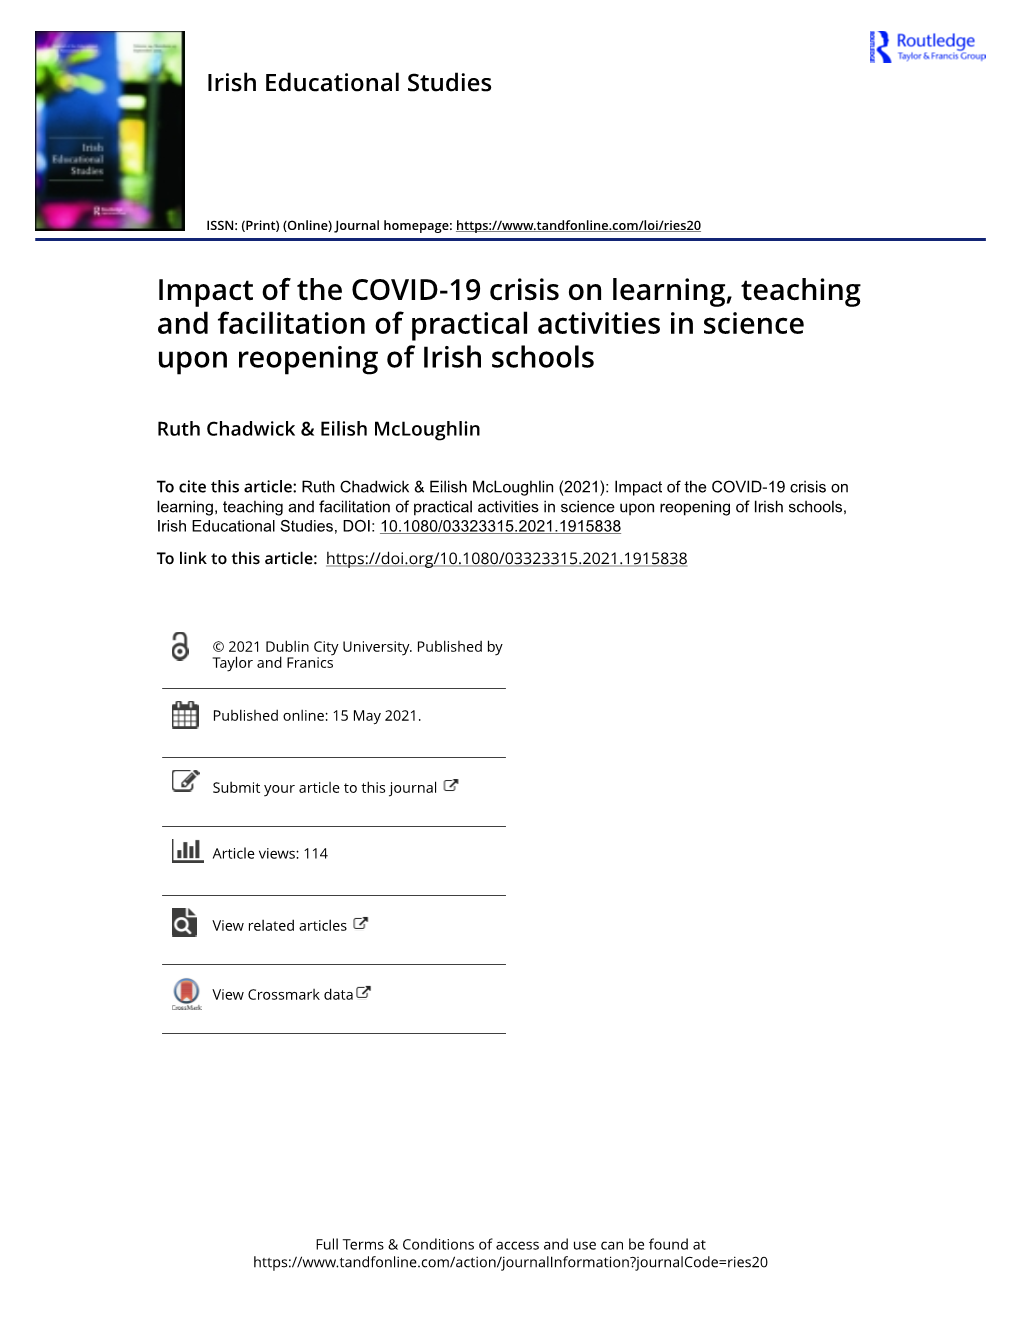 Impact of the COVID-19 Crisis on Learning, Teaching and Facilitation of Practical Activities in Science Upon Reopening of Irish Schools